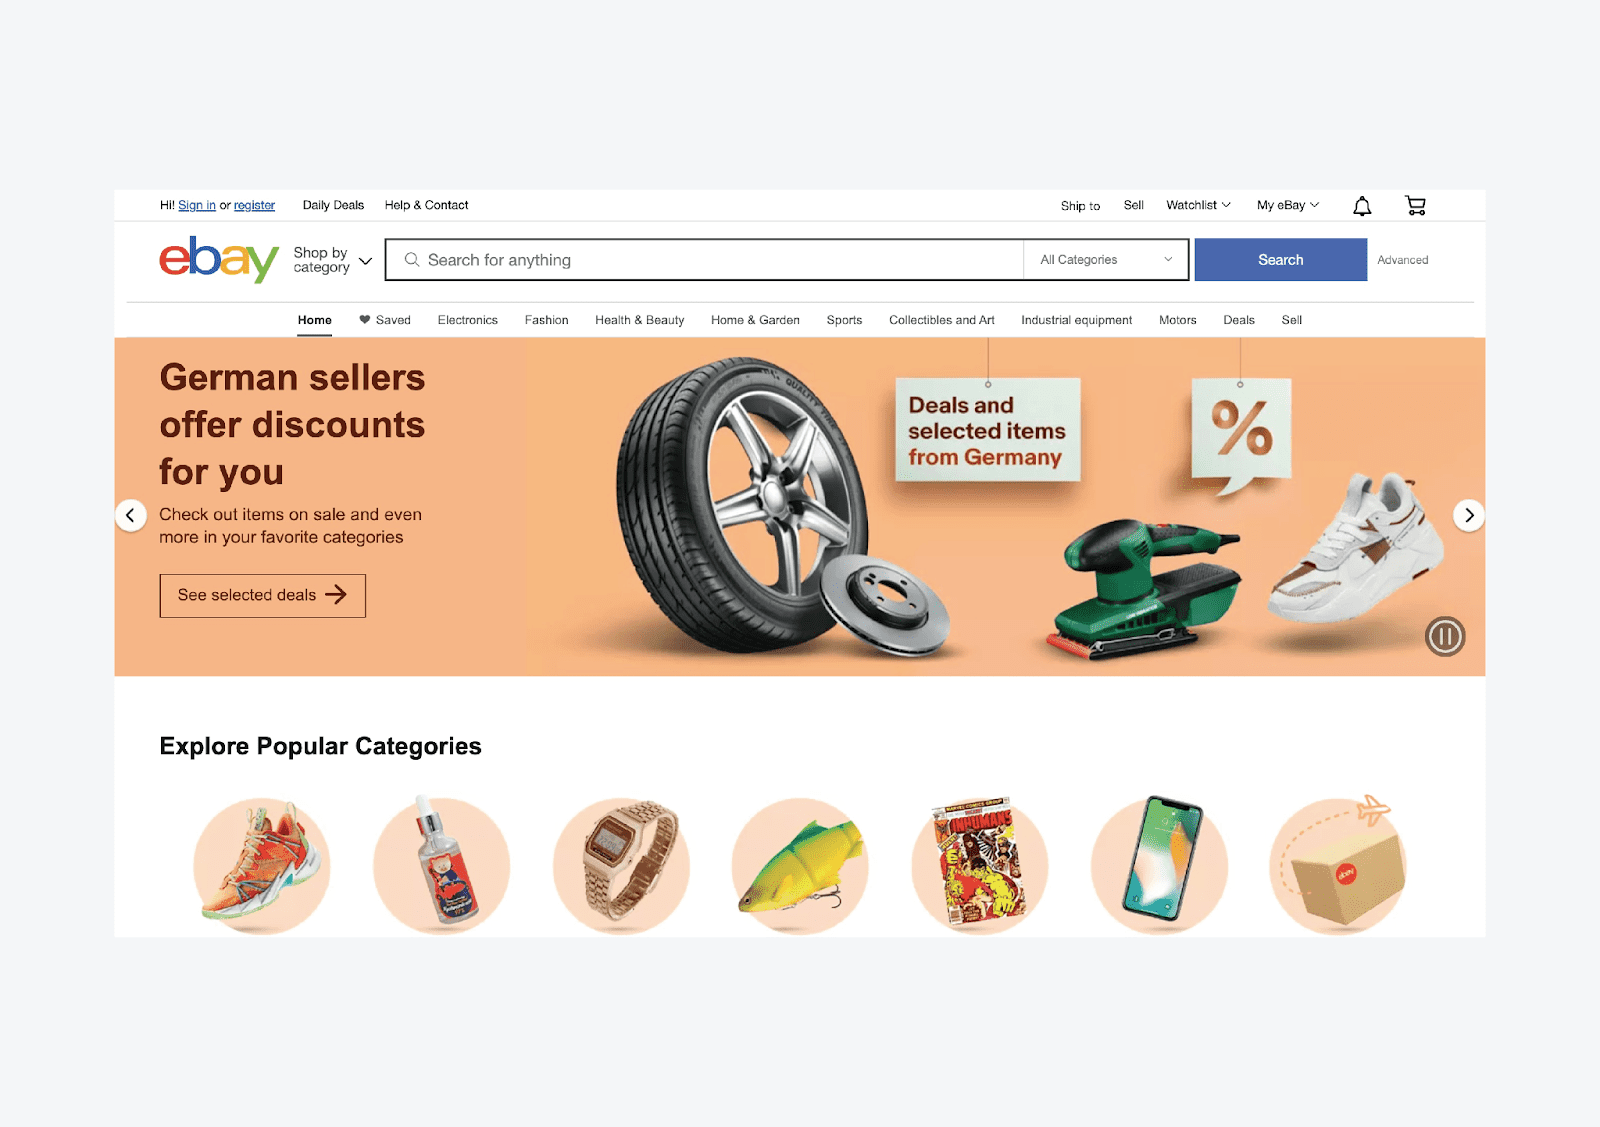 Ebay website with logo and search bar